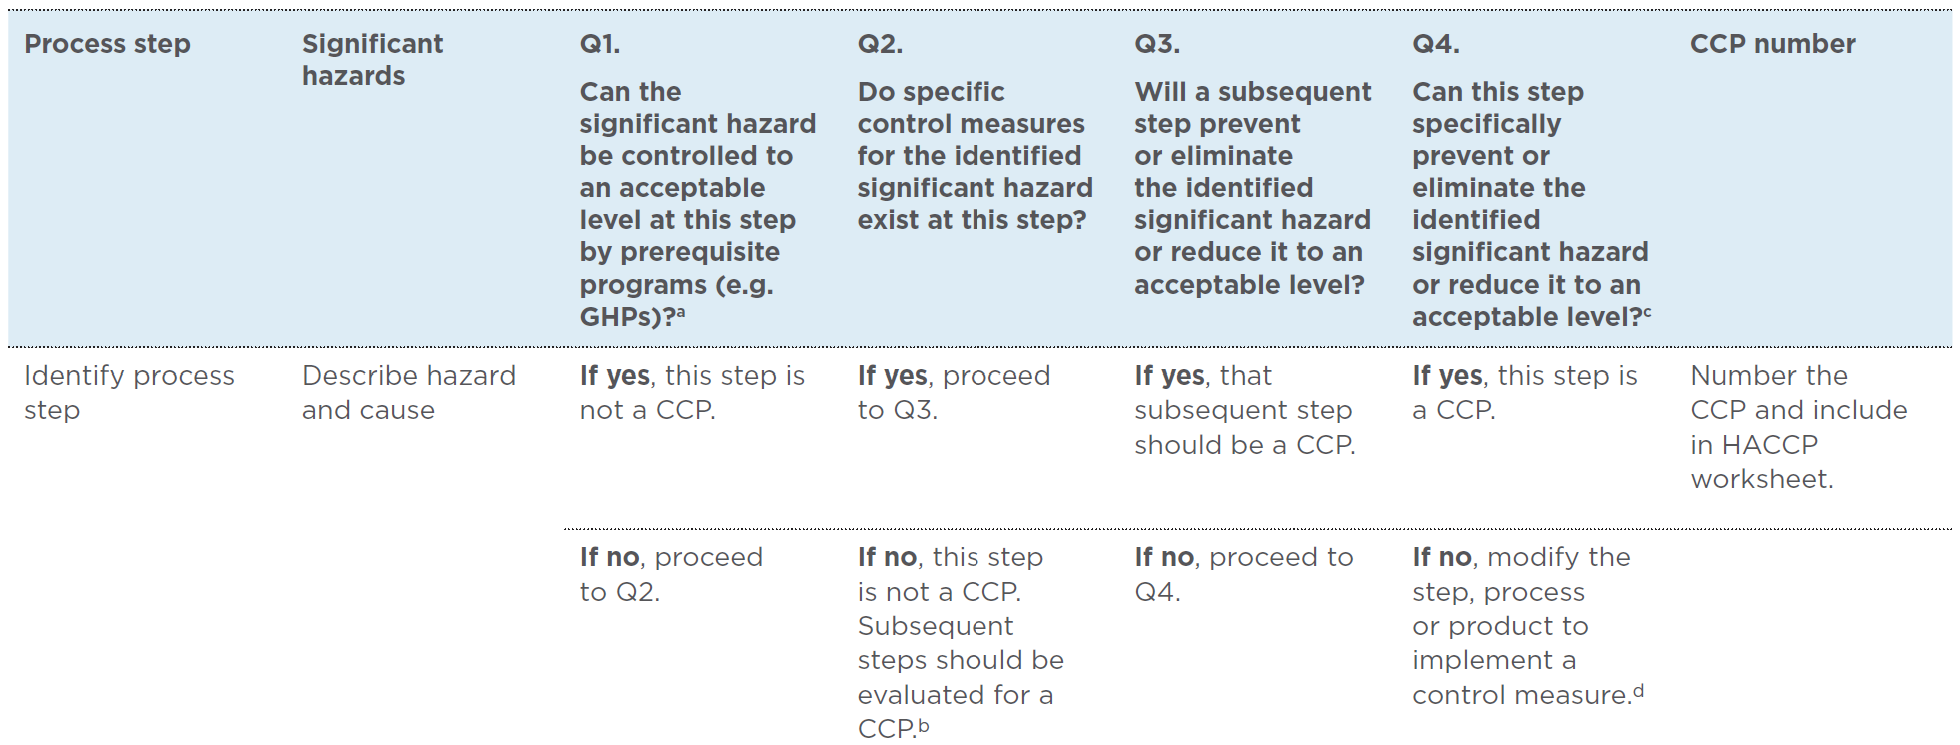 Example of a CCP determination worksheet